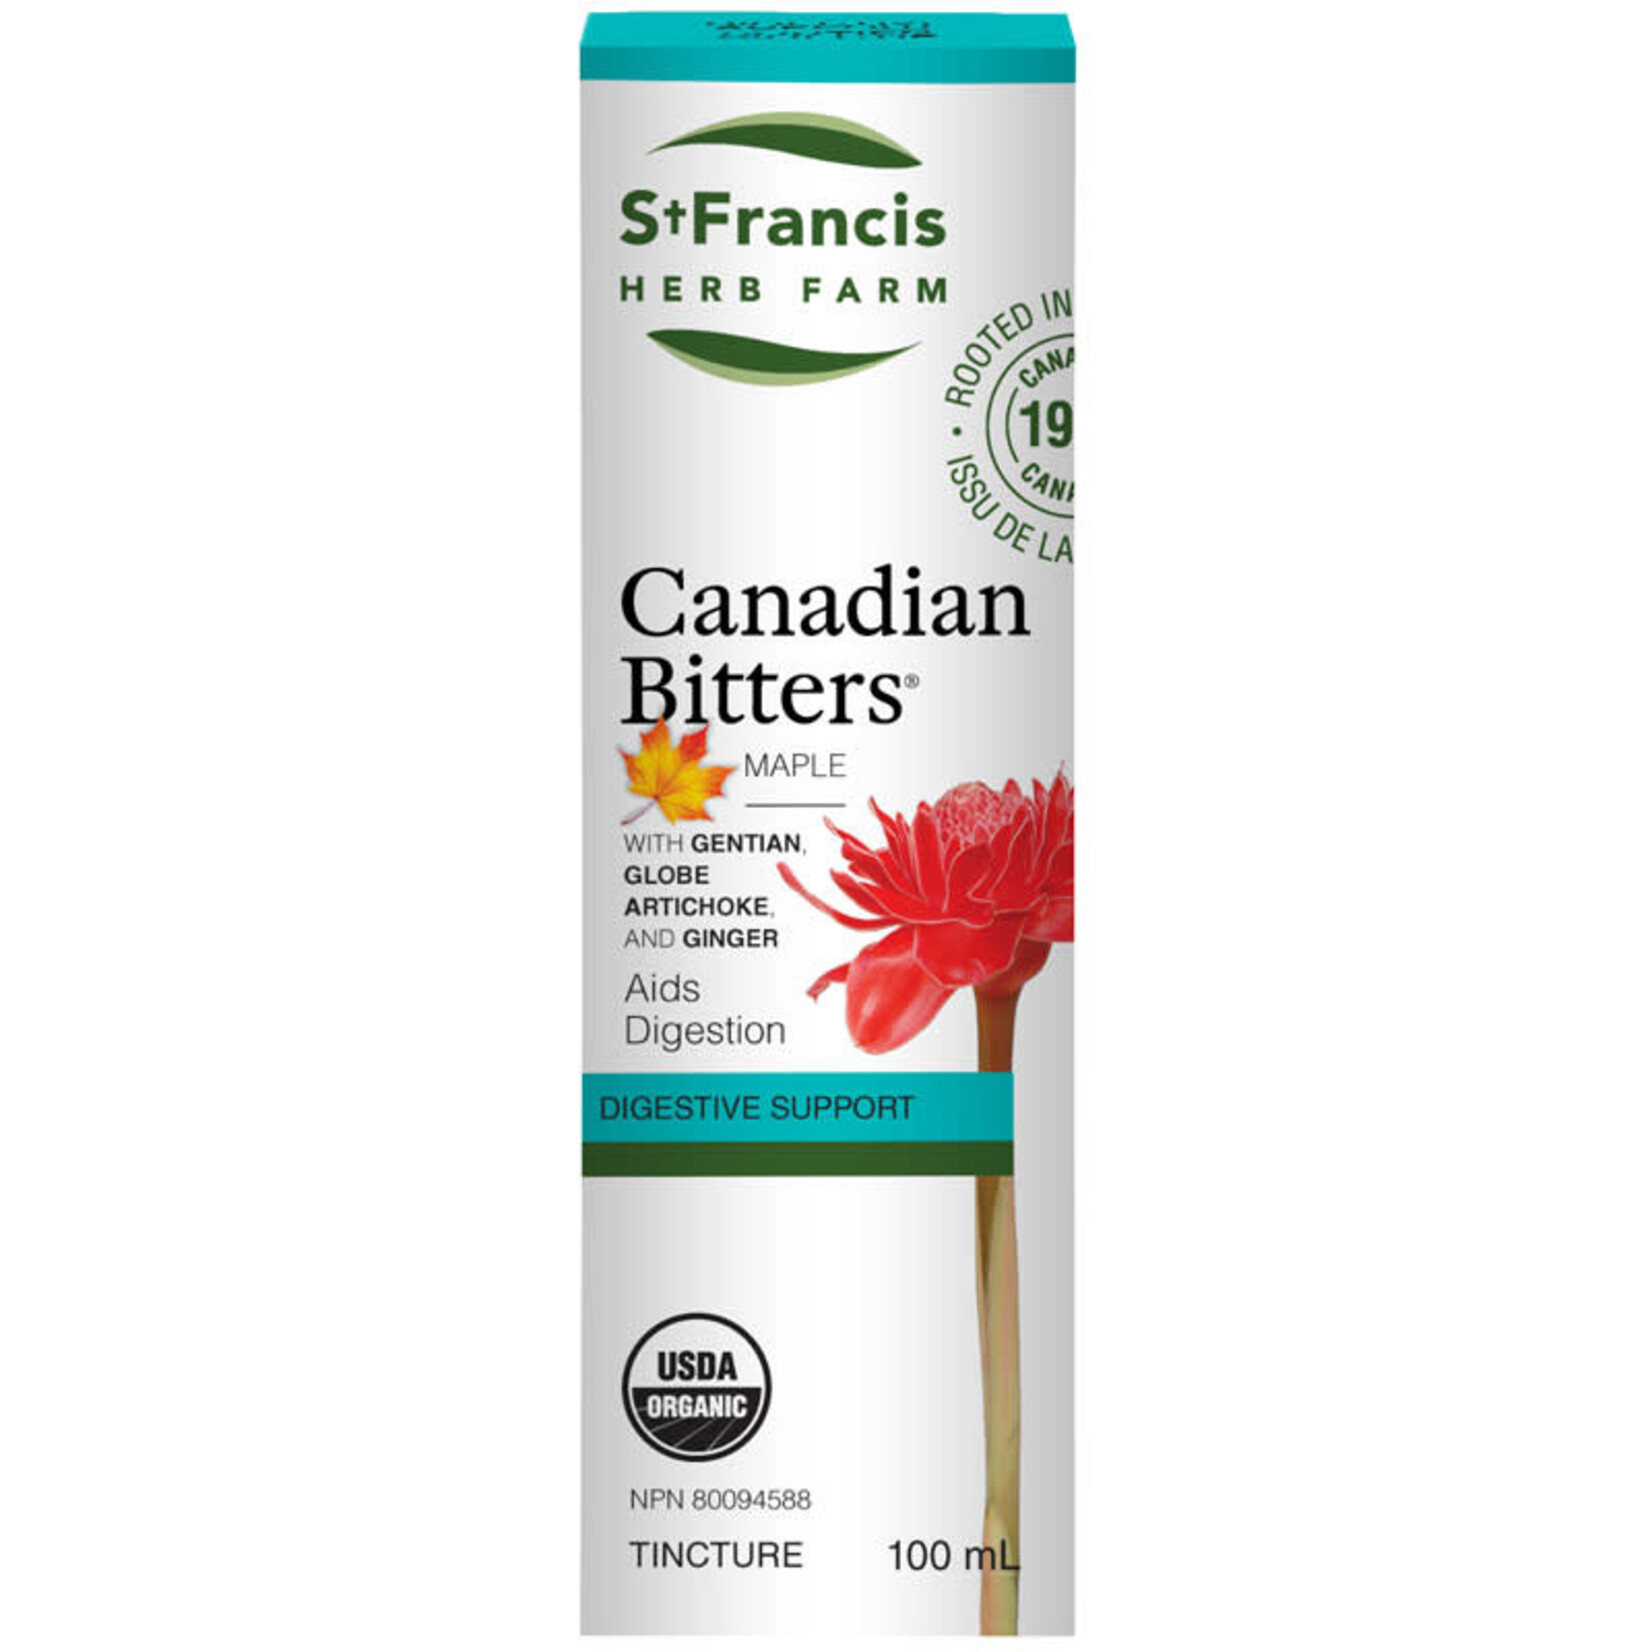 ST FRANCIS ST FRANCIS CANADIAN BITTERS MAPLE 100ML